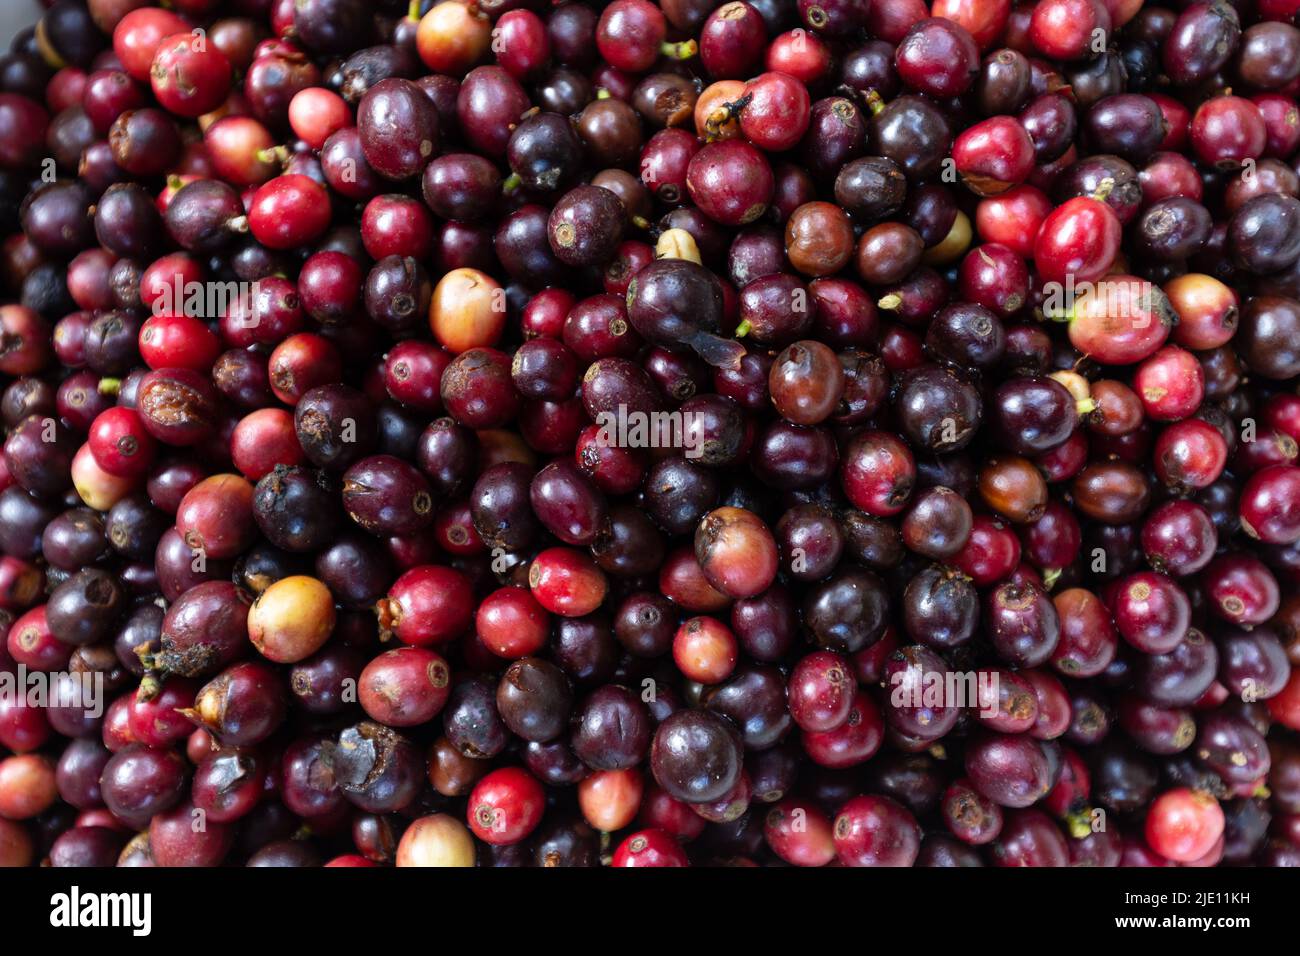 Background of ripe coffee fruits drying under the sun Stock Photo